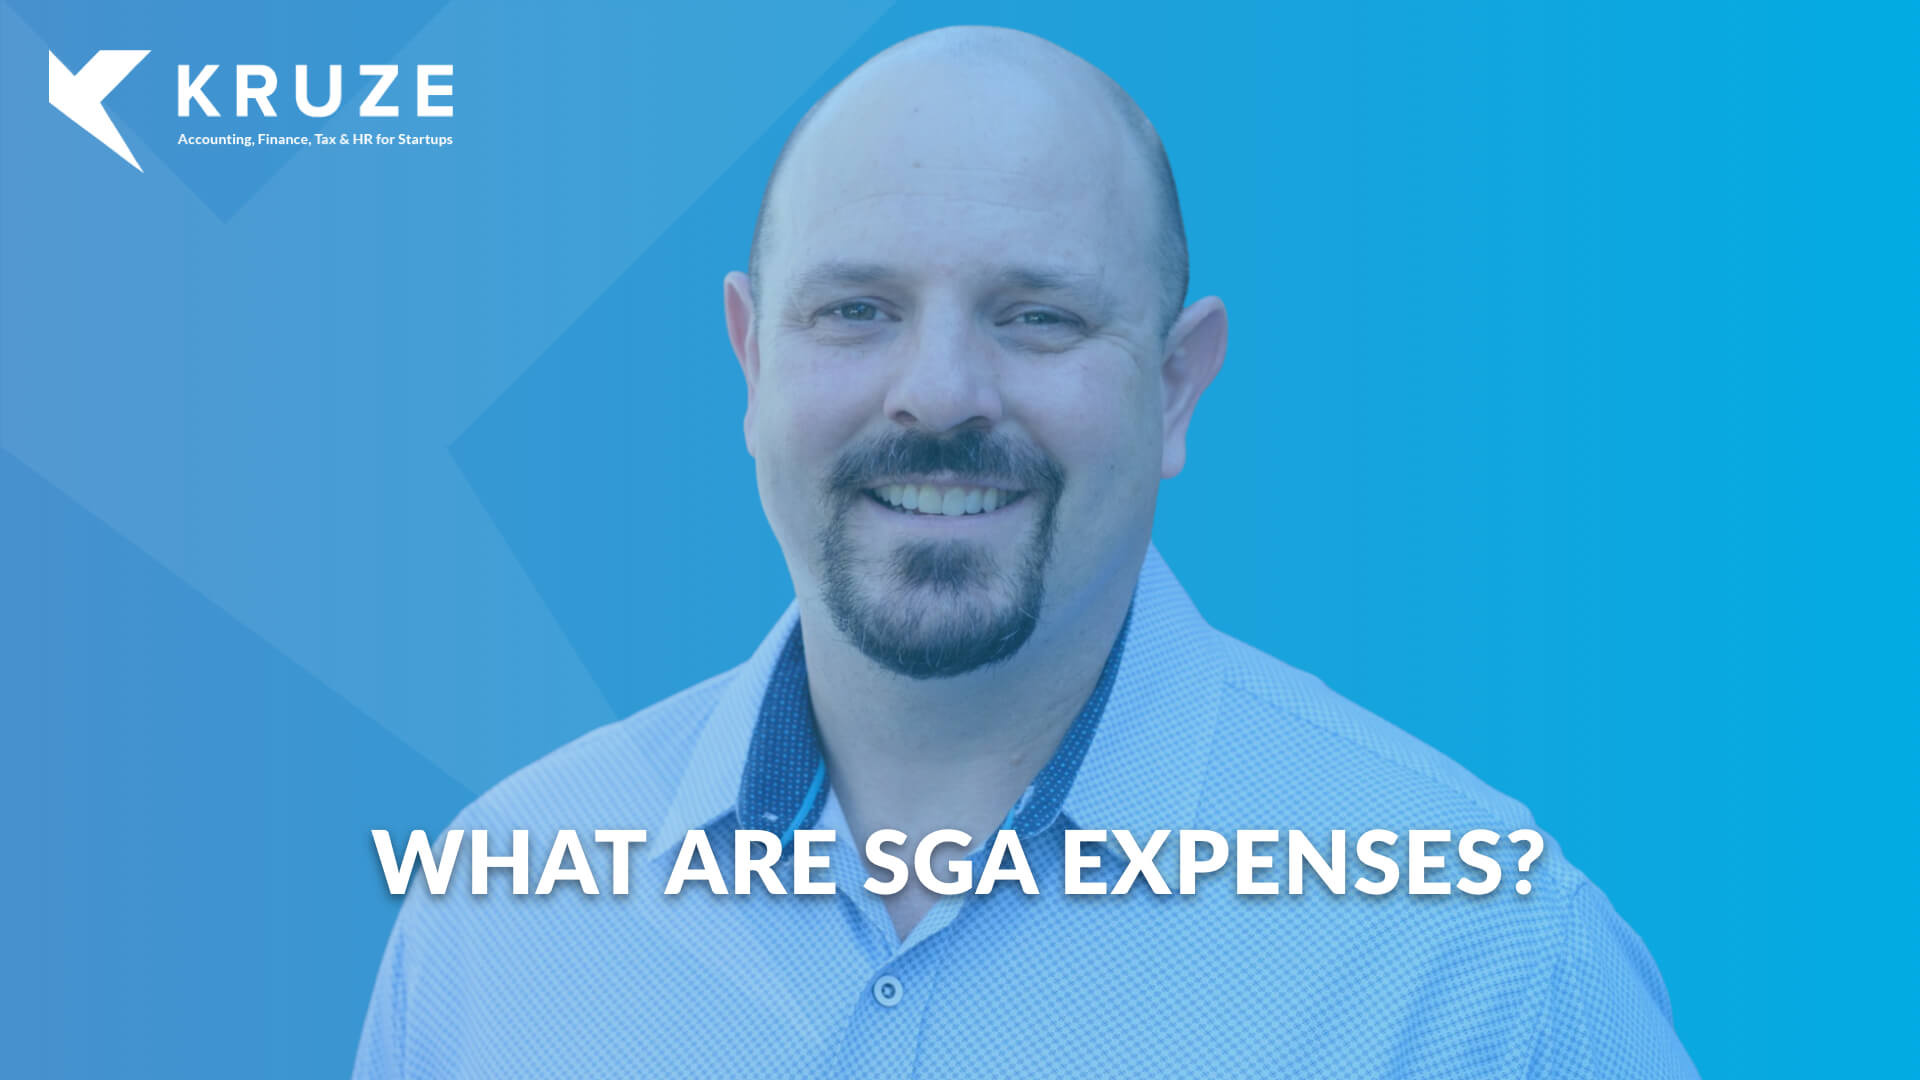 What are SG&A expenses?